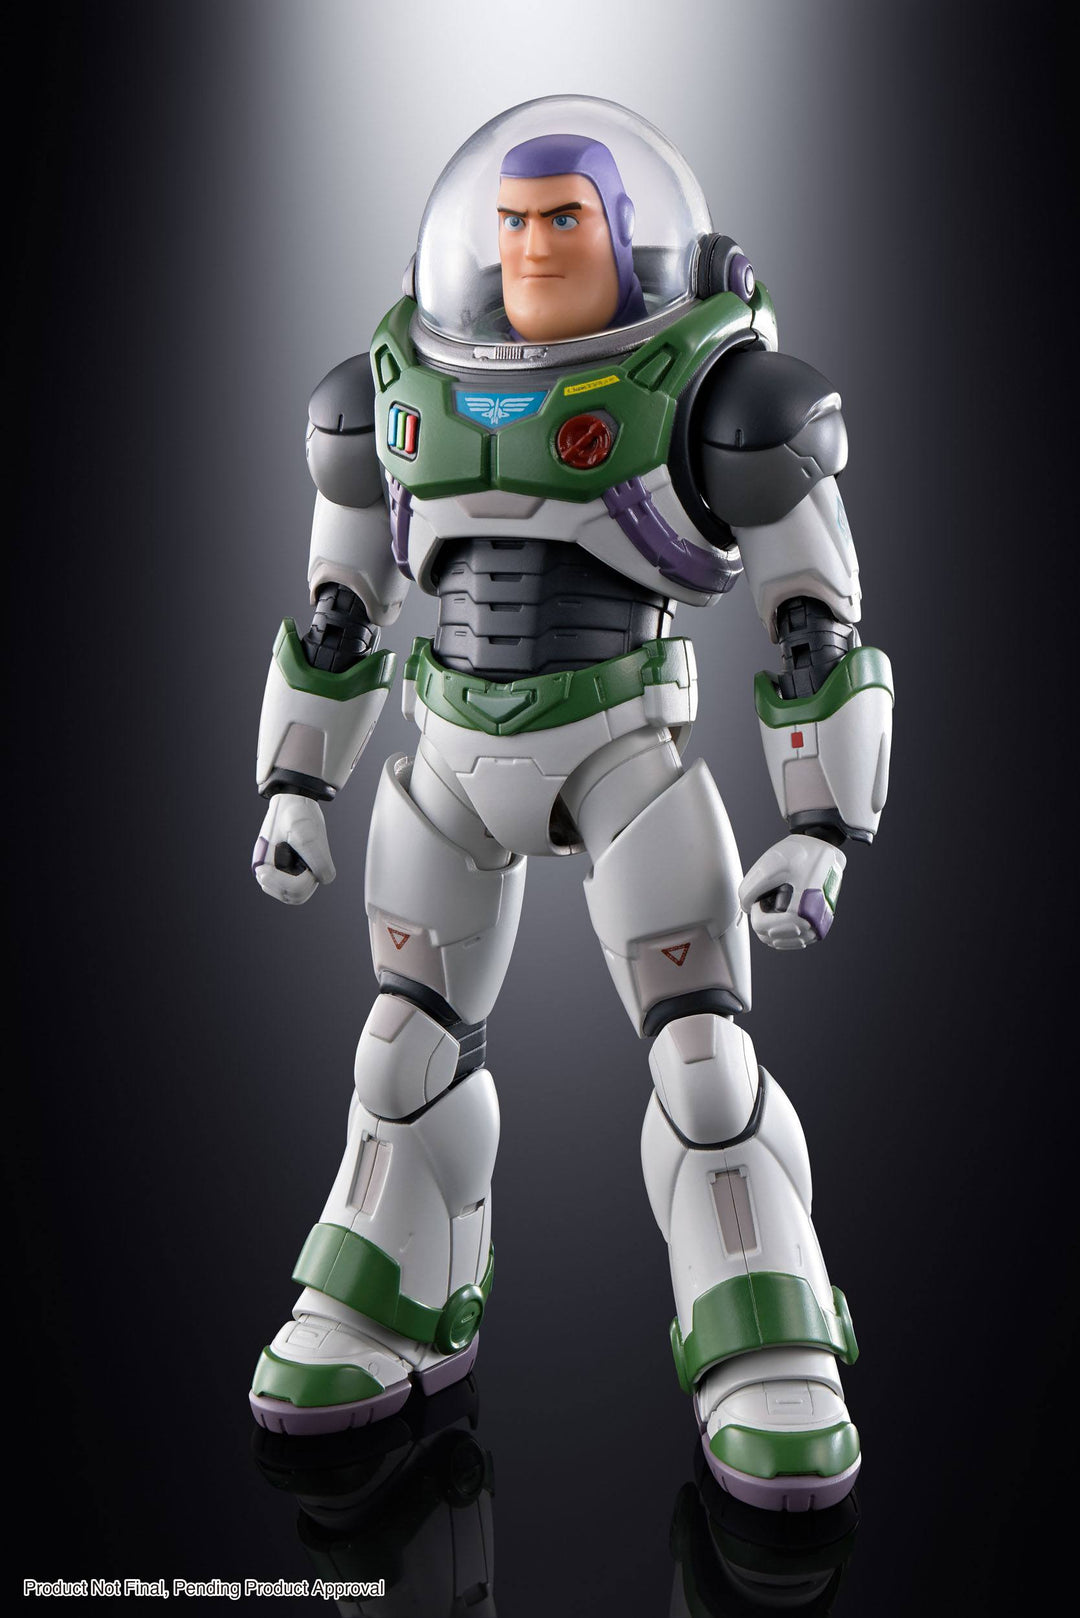 Lightyear S.H. Figuarts Action Figure Buzz Lightyear Alpha Suit - Infinity Collectables 